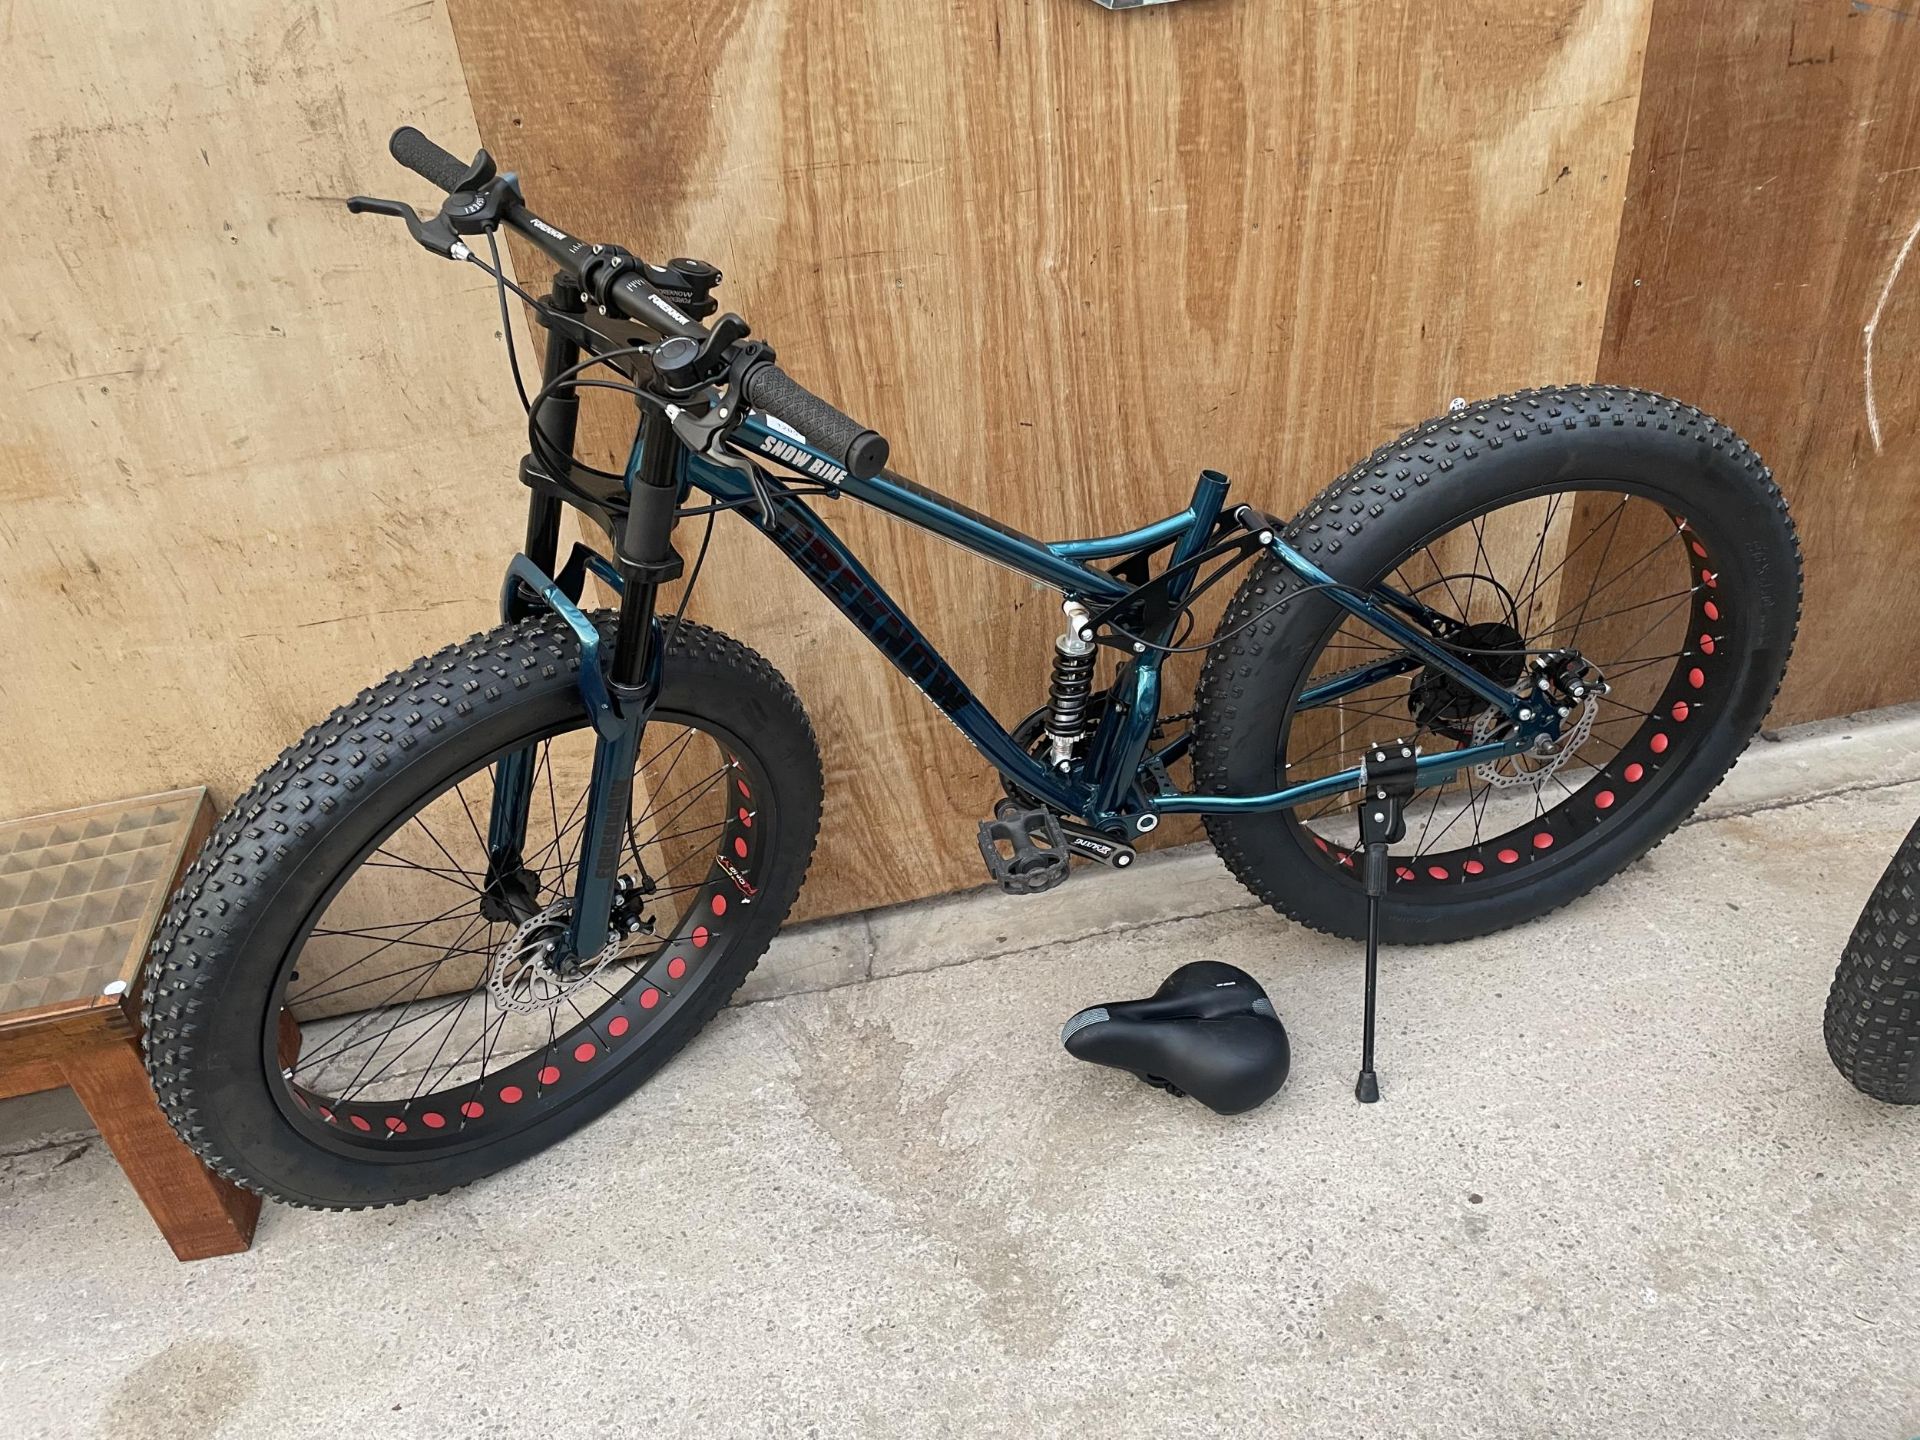 AN AS NEW FOREKNOW SUPERLITE MOUNTAIN BIKE WITH BREAK DISCS AND 21 SPEED GEAR SYSTEM (SEAT NEEDS